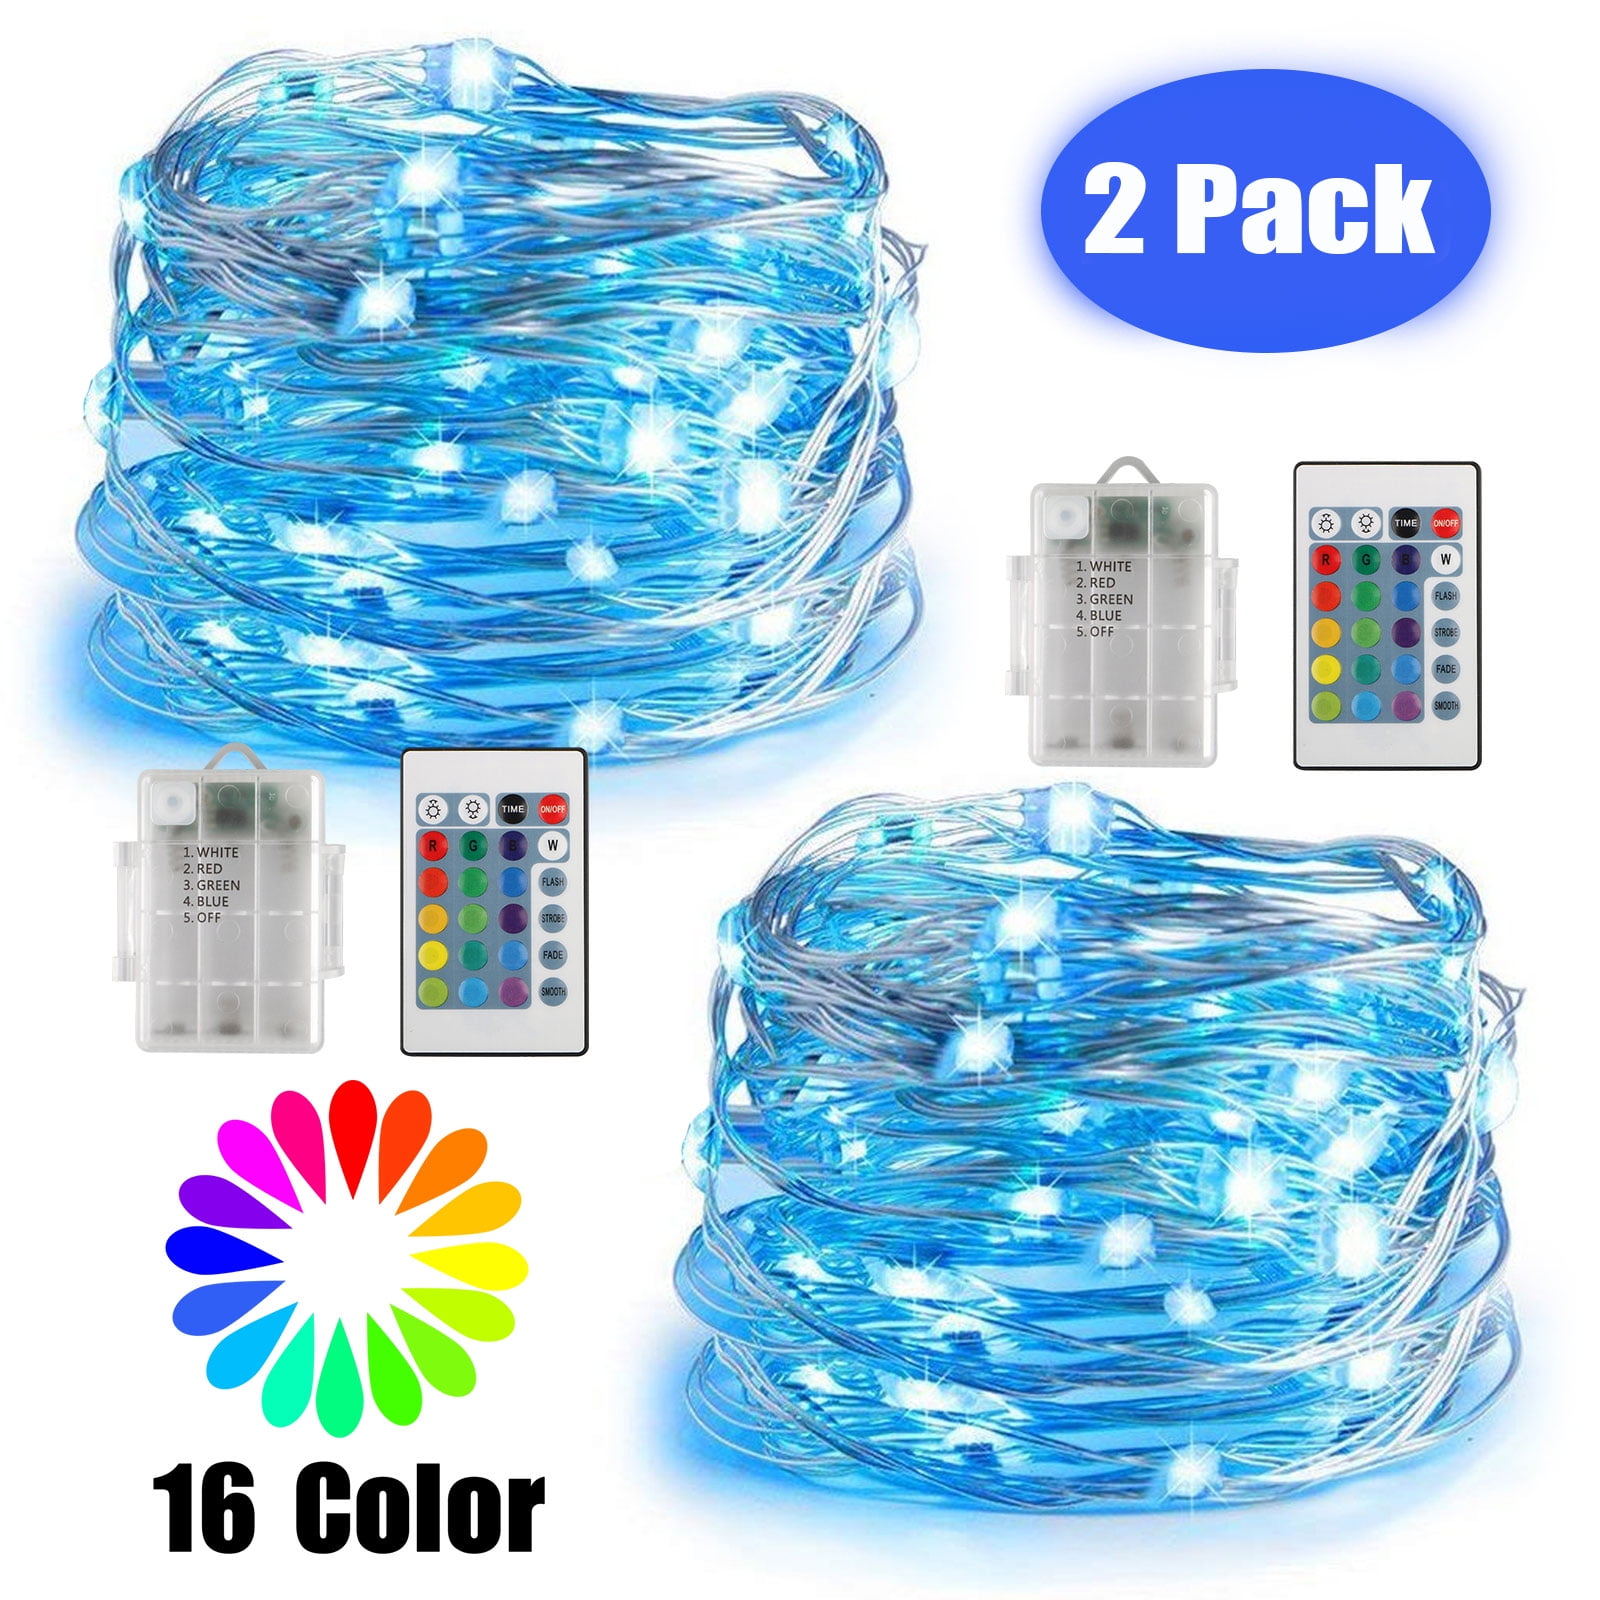 16color 10M Copper Wire LED String Fairy Light Strip Waterproof W/ 24 Key Remote 